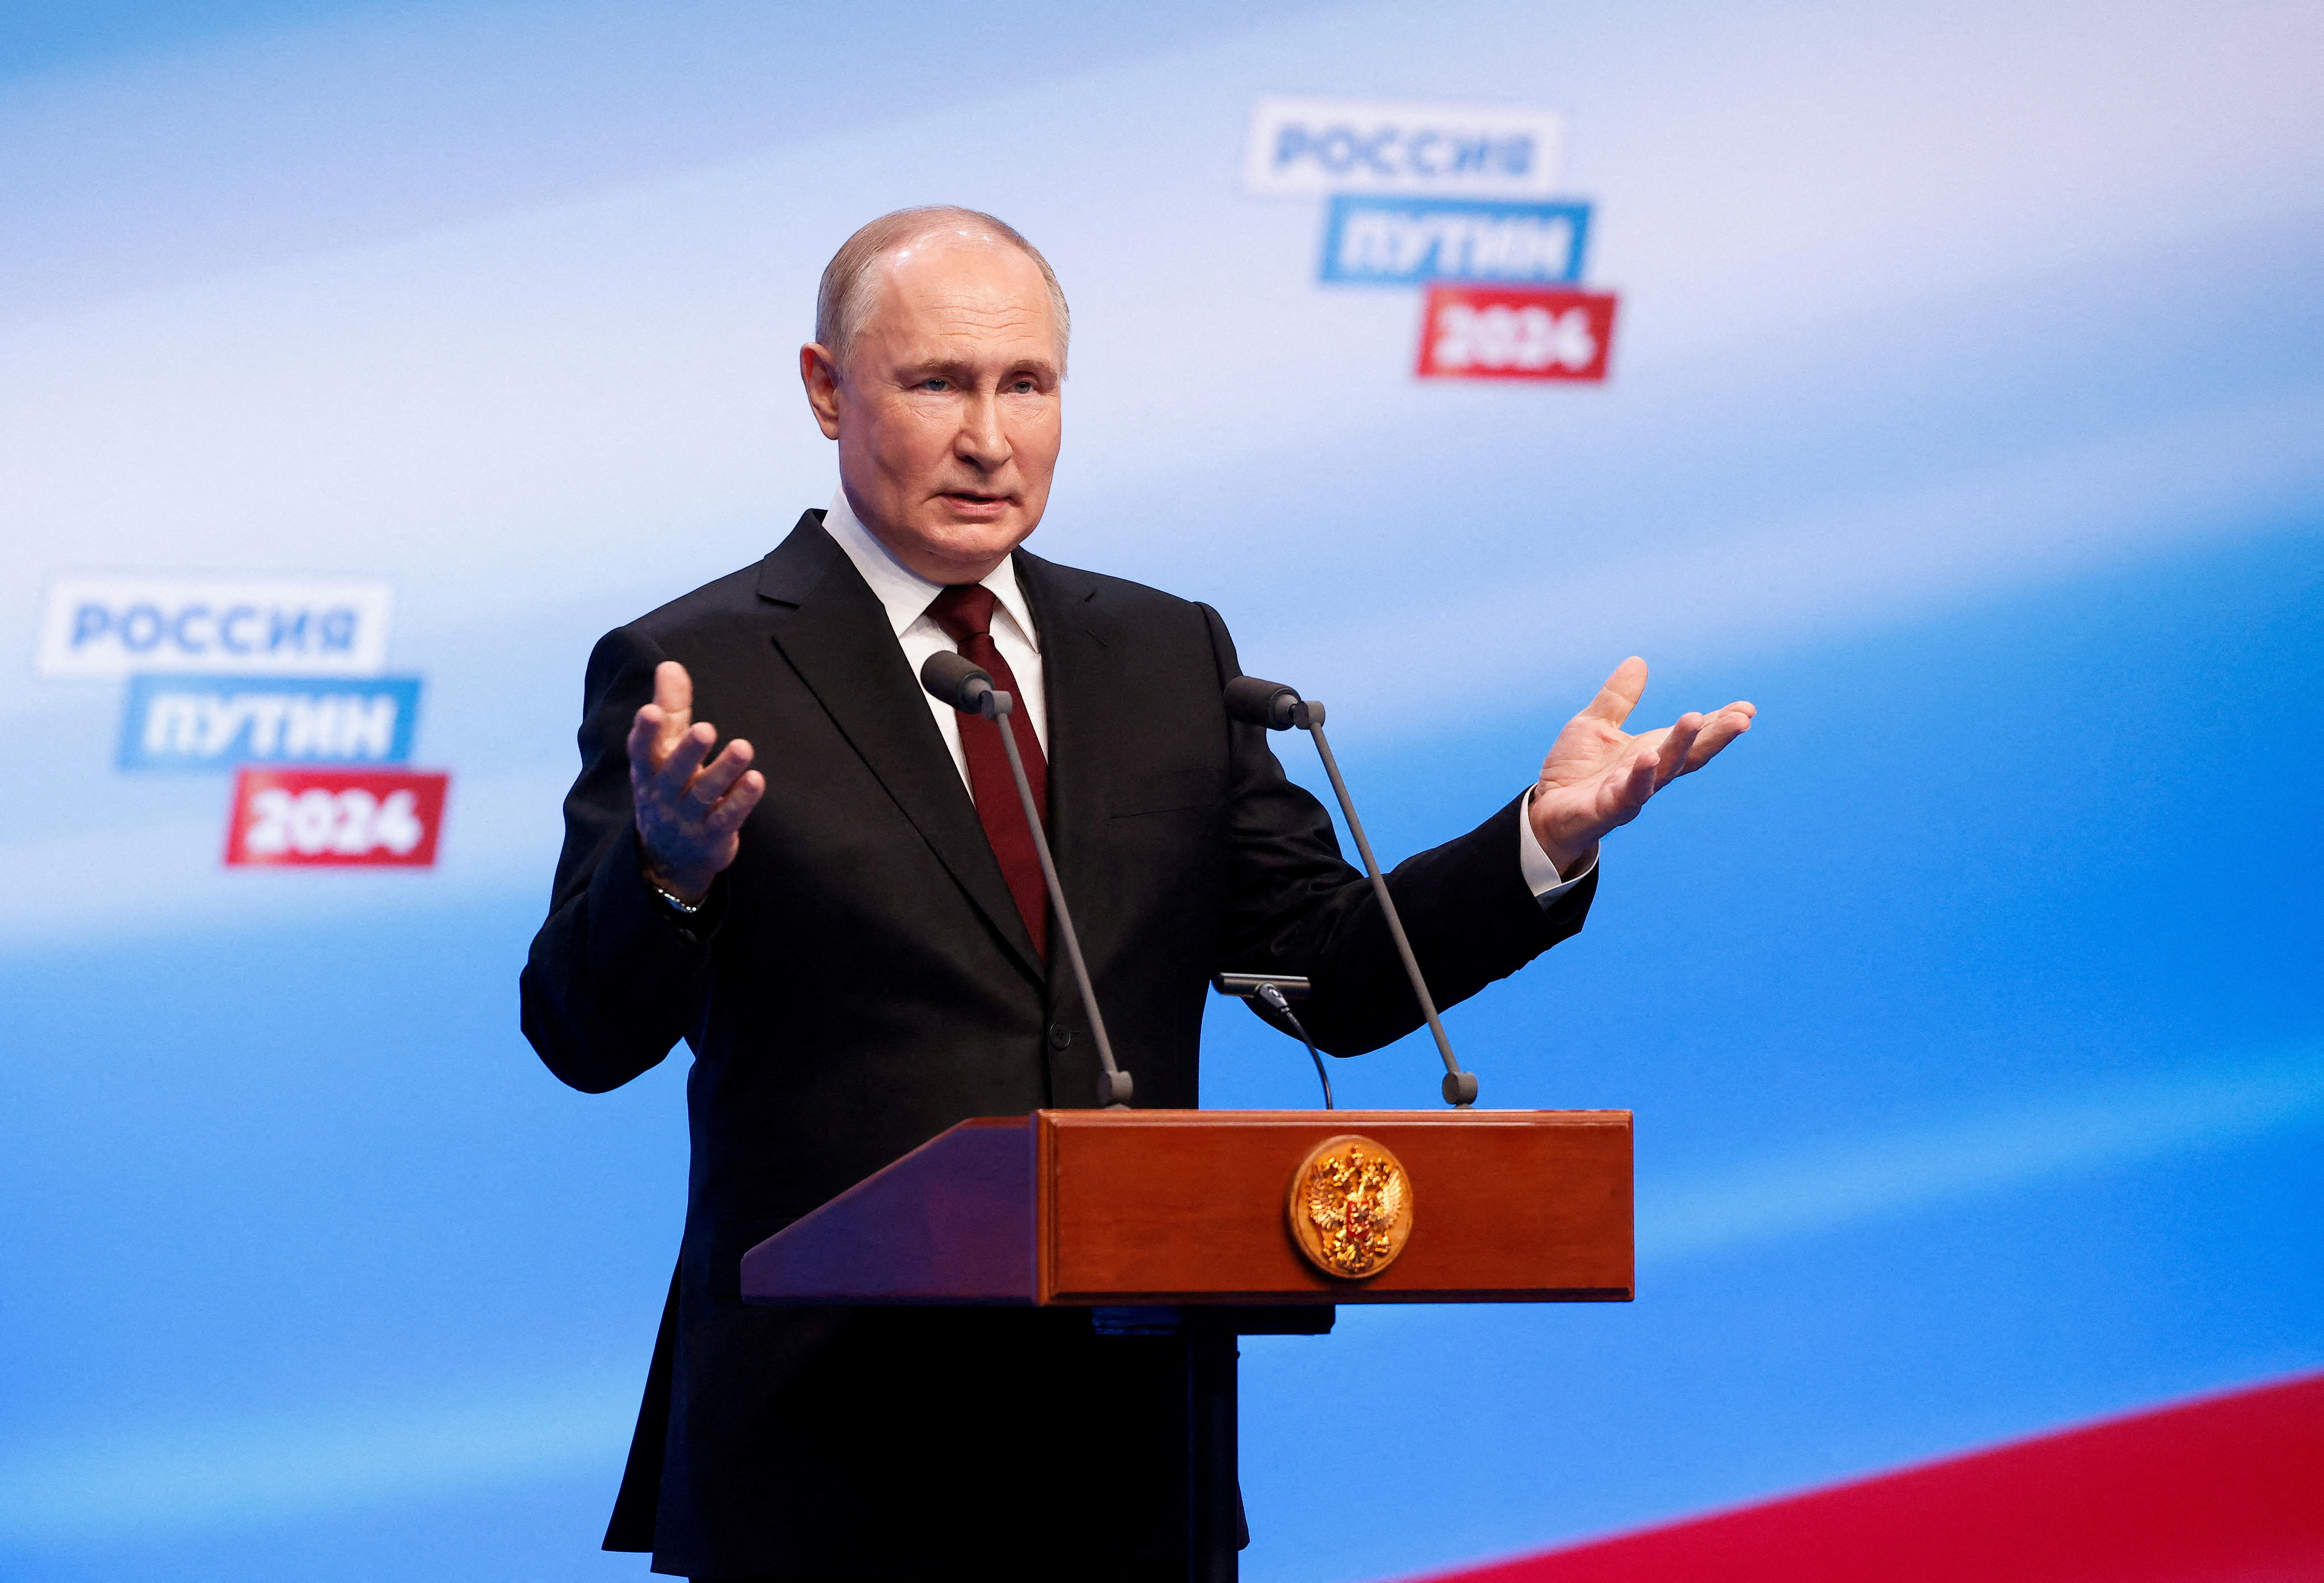 President Putin wins re-election with 87 percent of the vote to extend 25-year rule in Russia